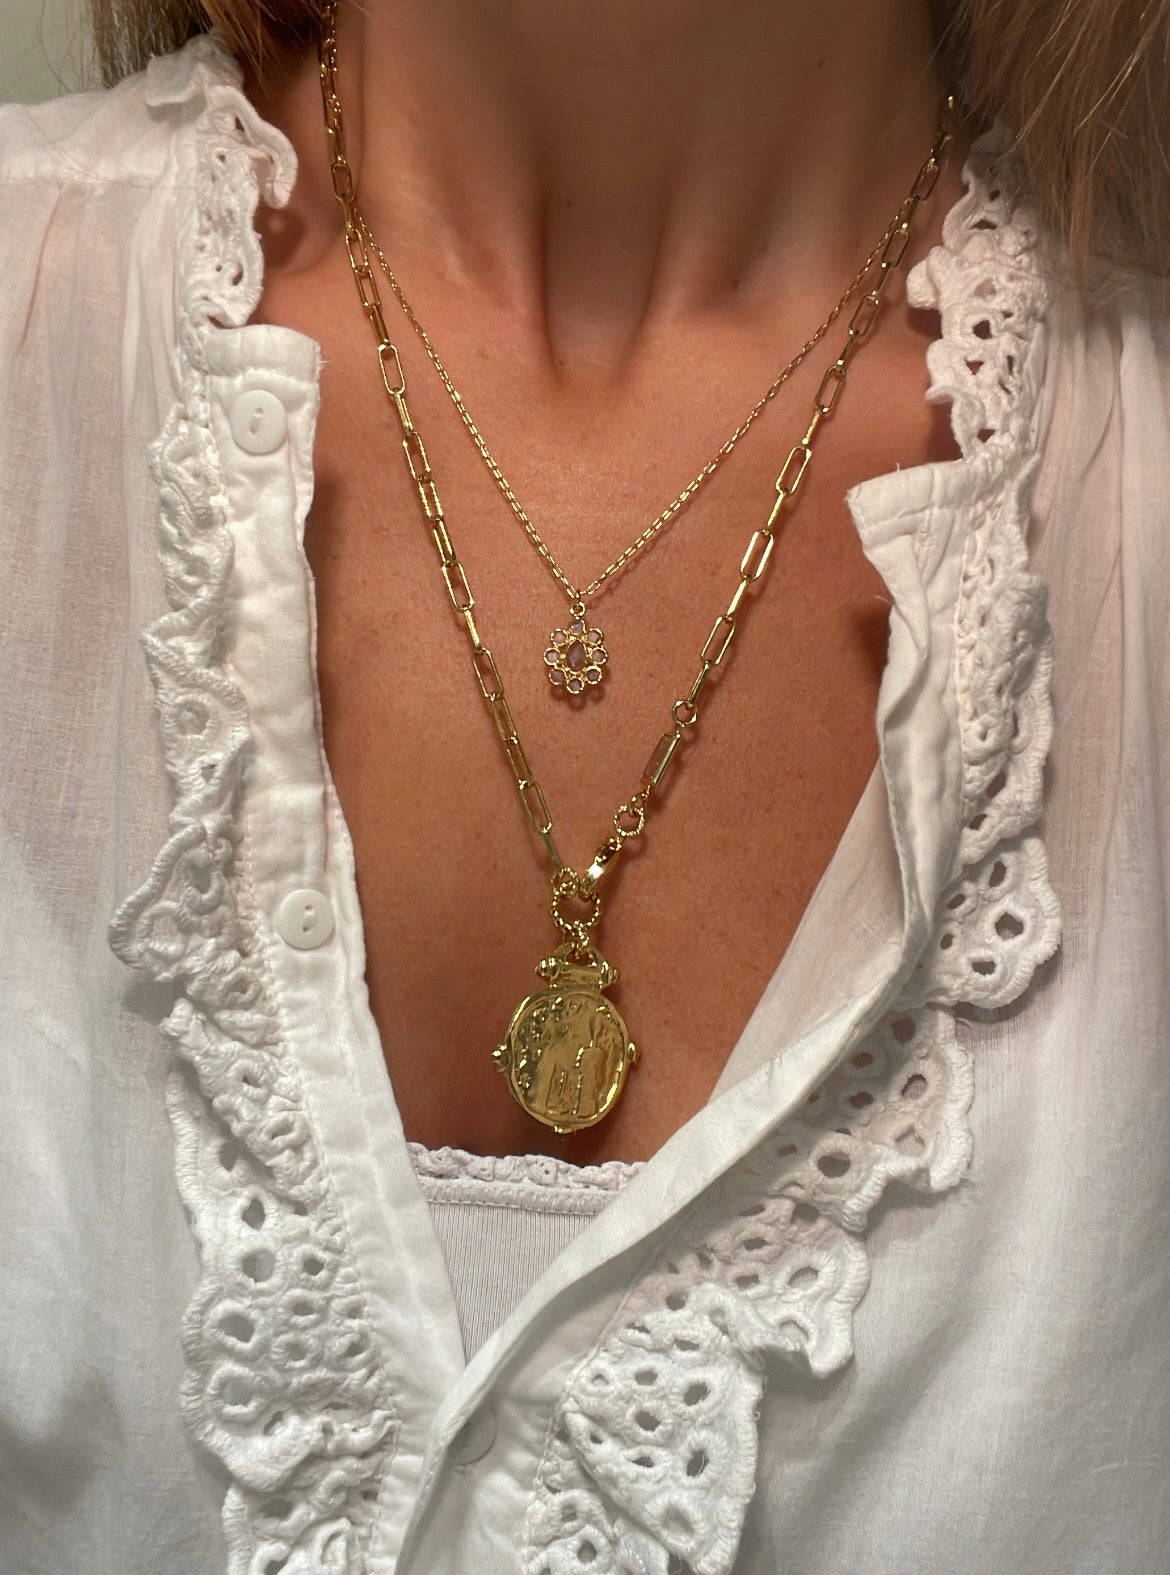 chunky statement necklace with chain and roman coin pendant by virginie berman little flower necklace for everyday jewellery